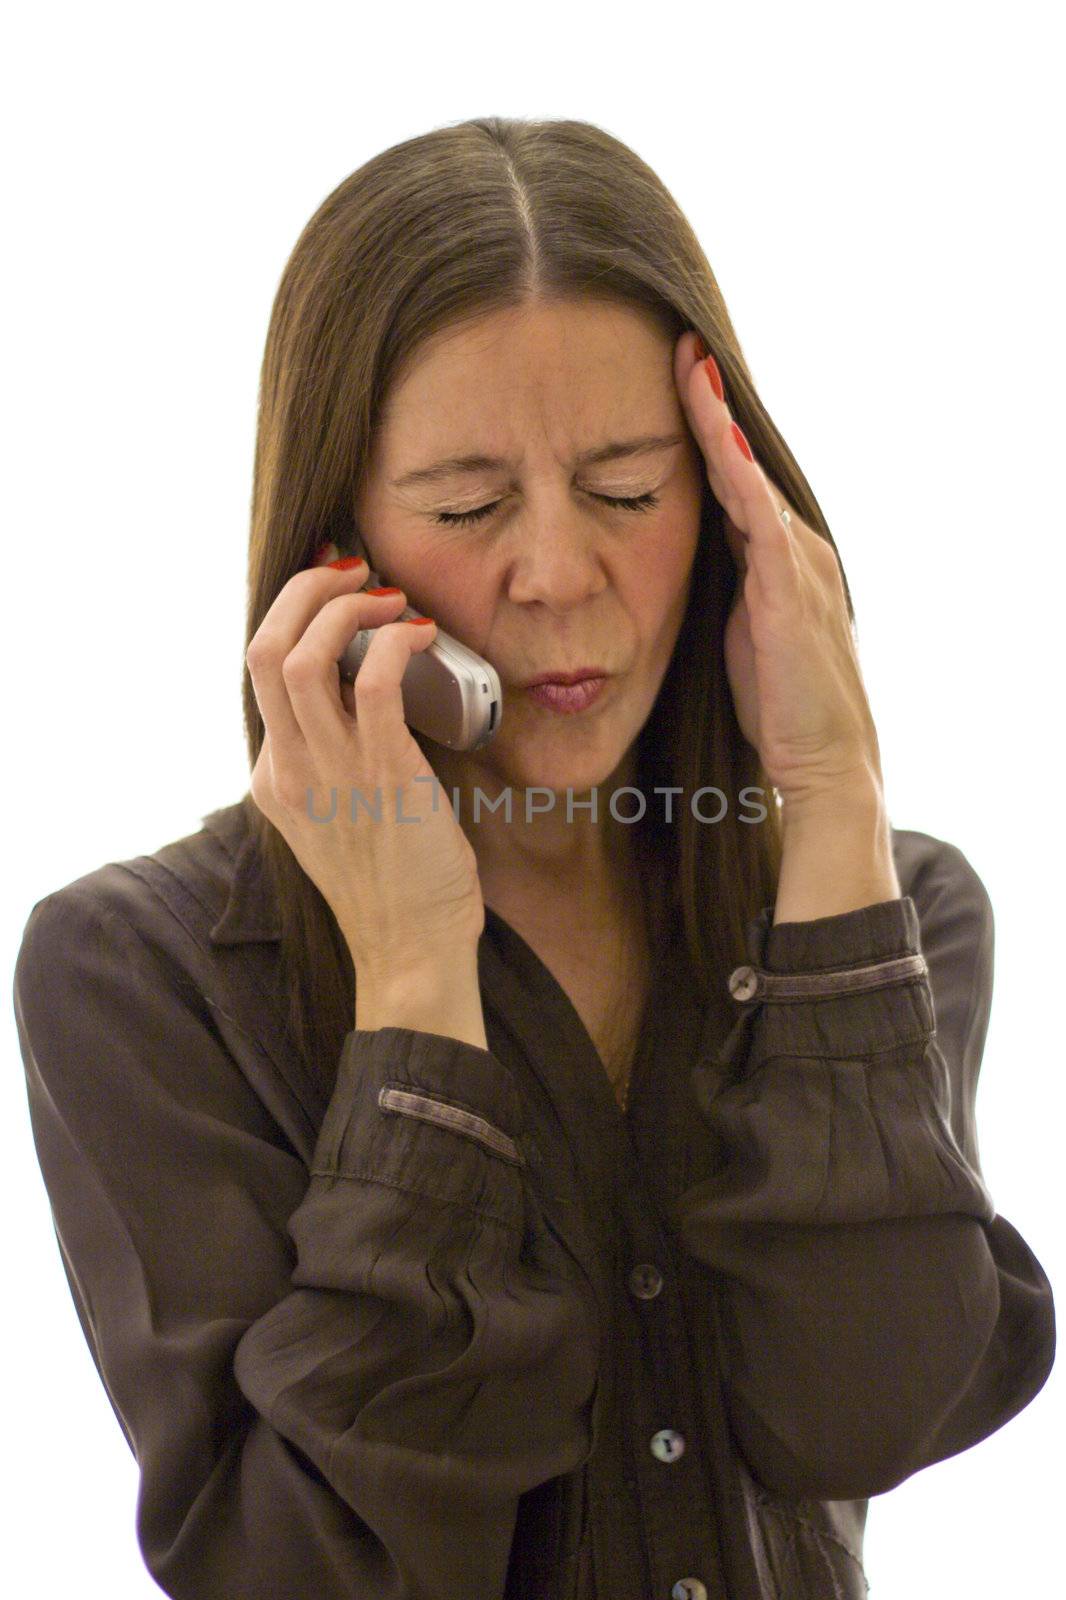 image of a stressed out professional woman on a mobile phone